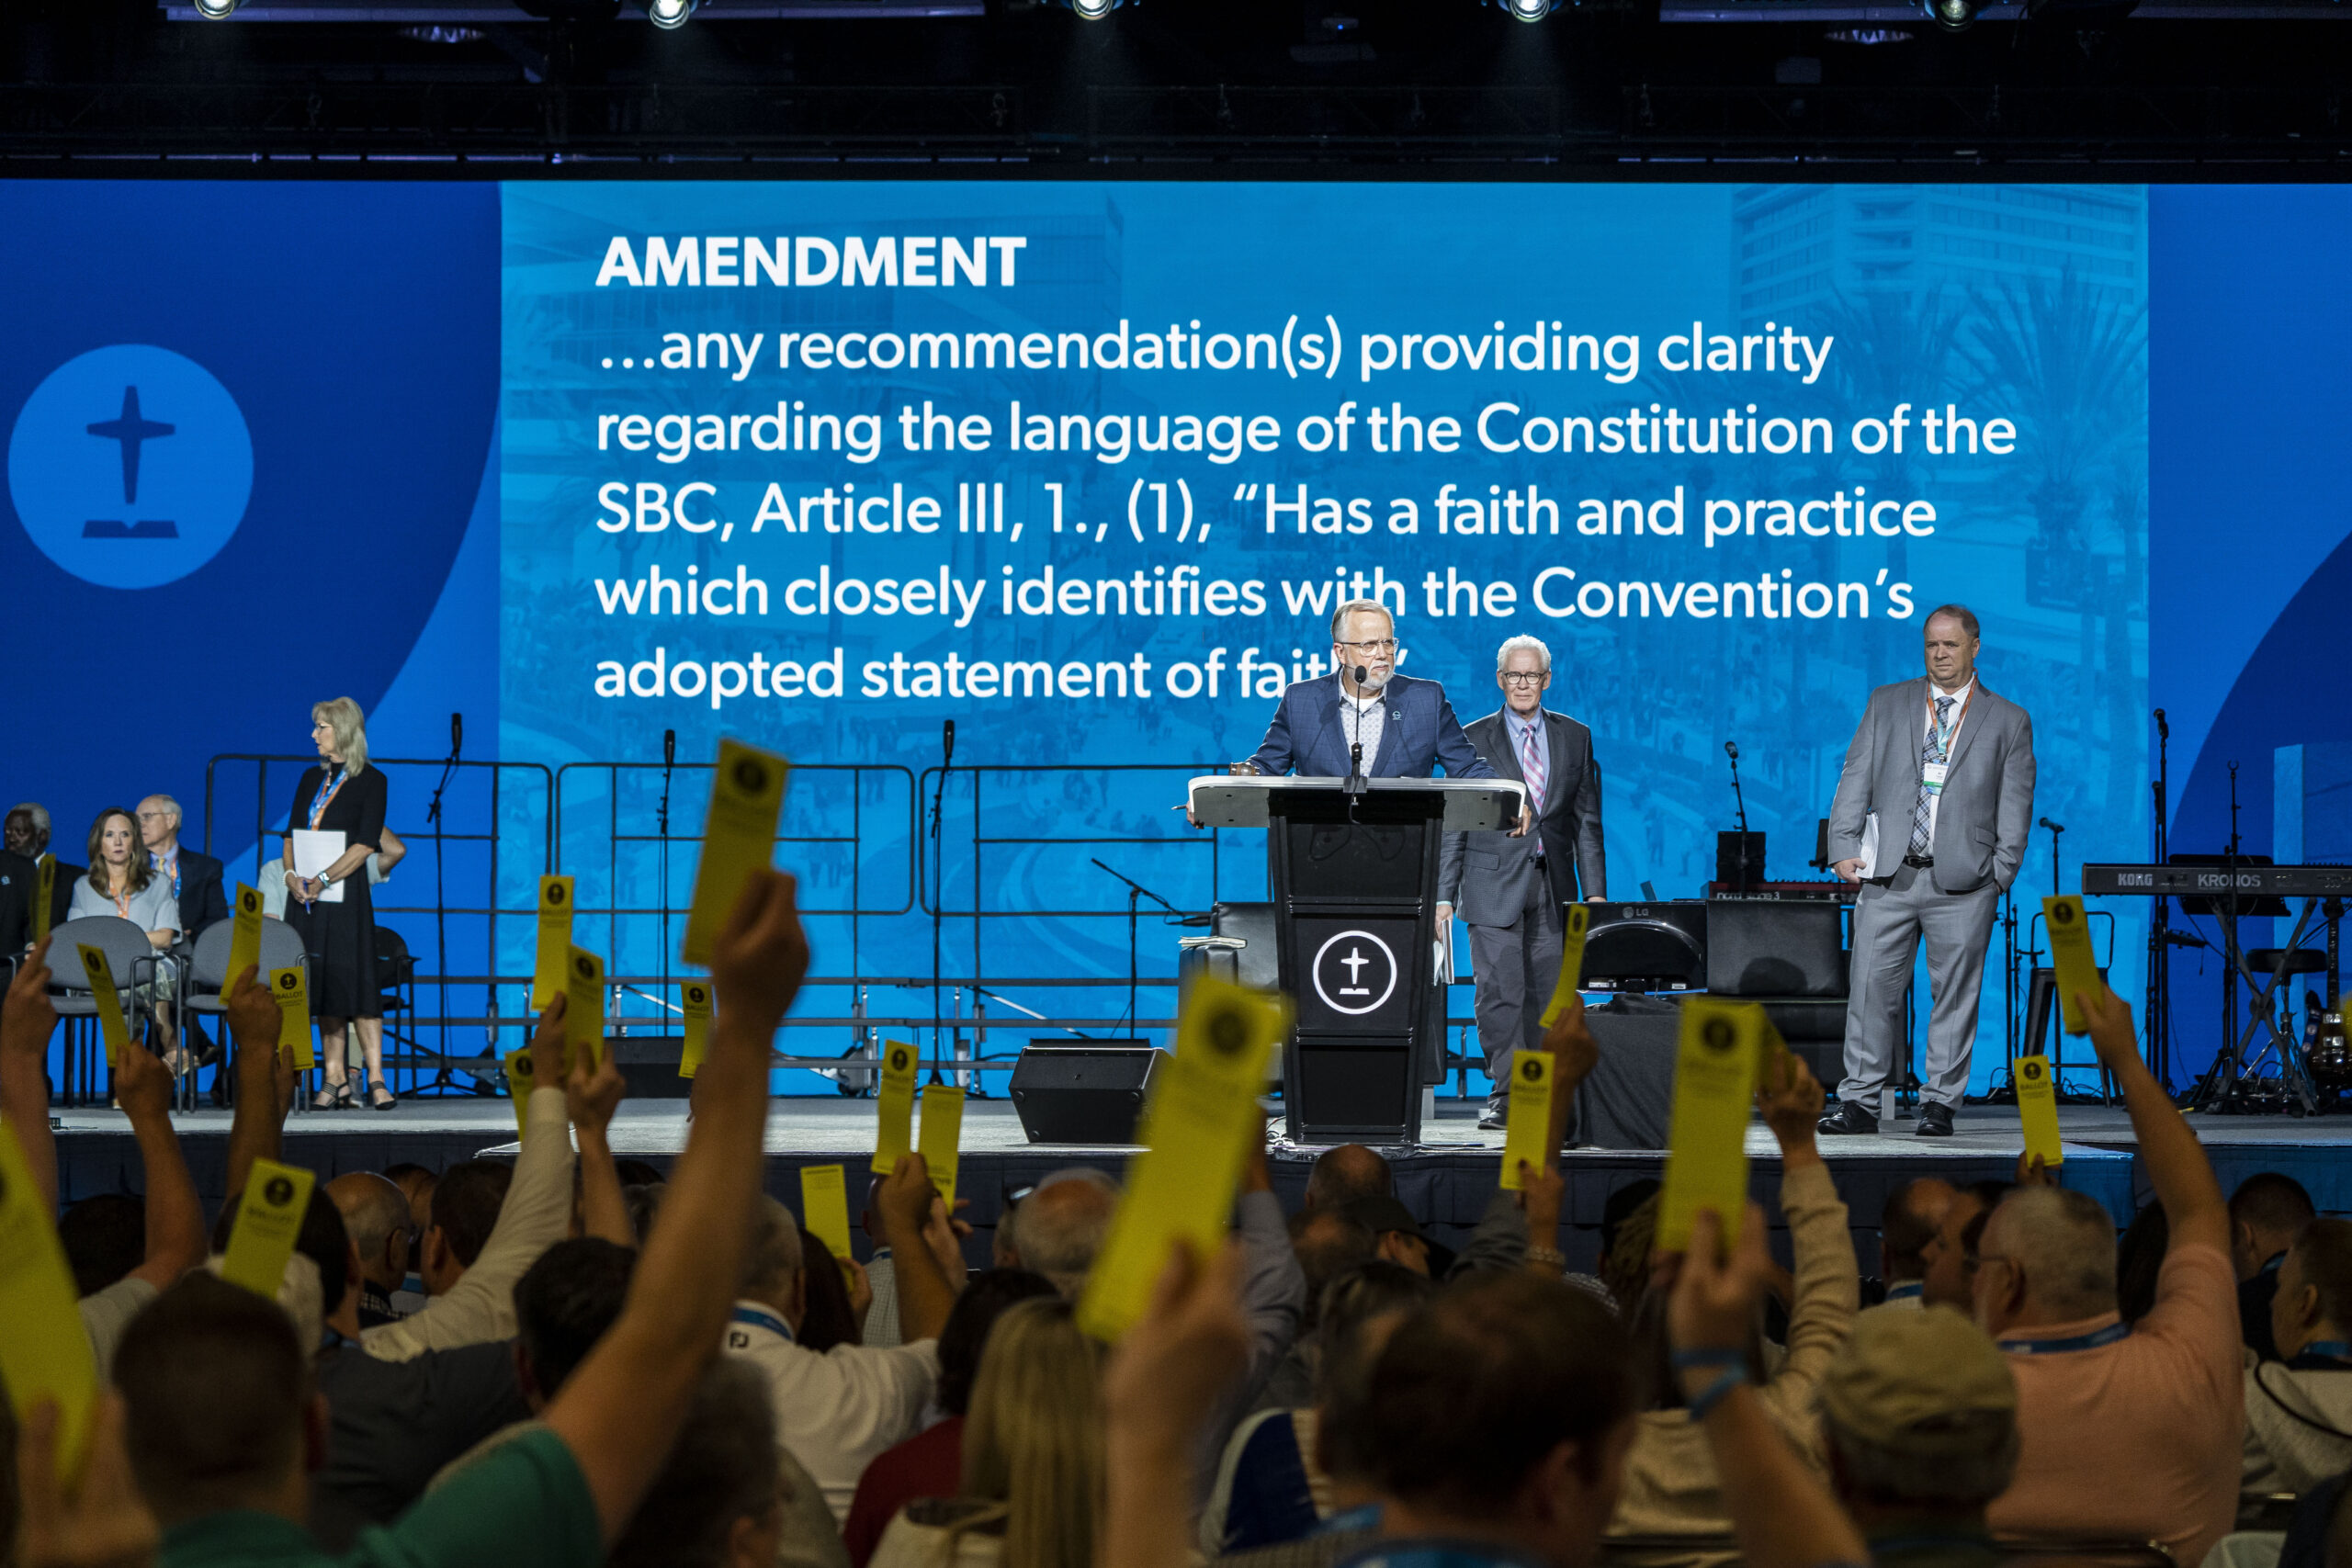 People vote on an amendment at the Southern Baptist Convention, held at the Anaheim Convention Center in Anaheim, California, on Tuesday, June 14, 2022. Photo by Justin L. Stewart/Religion News Service